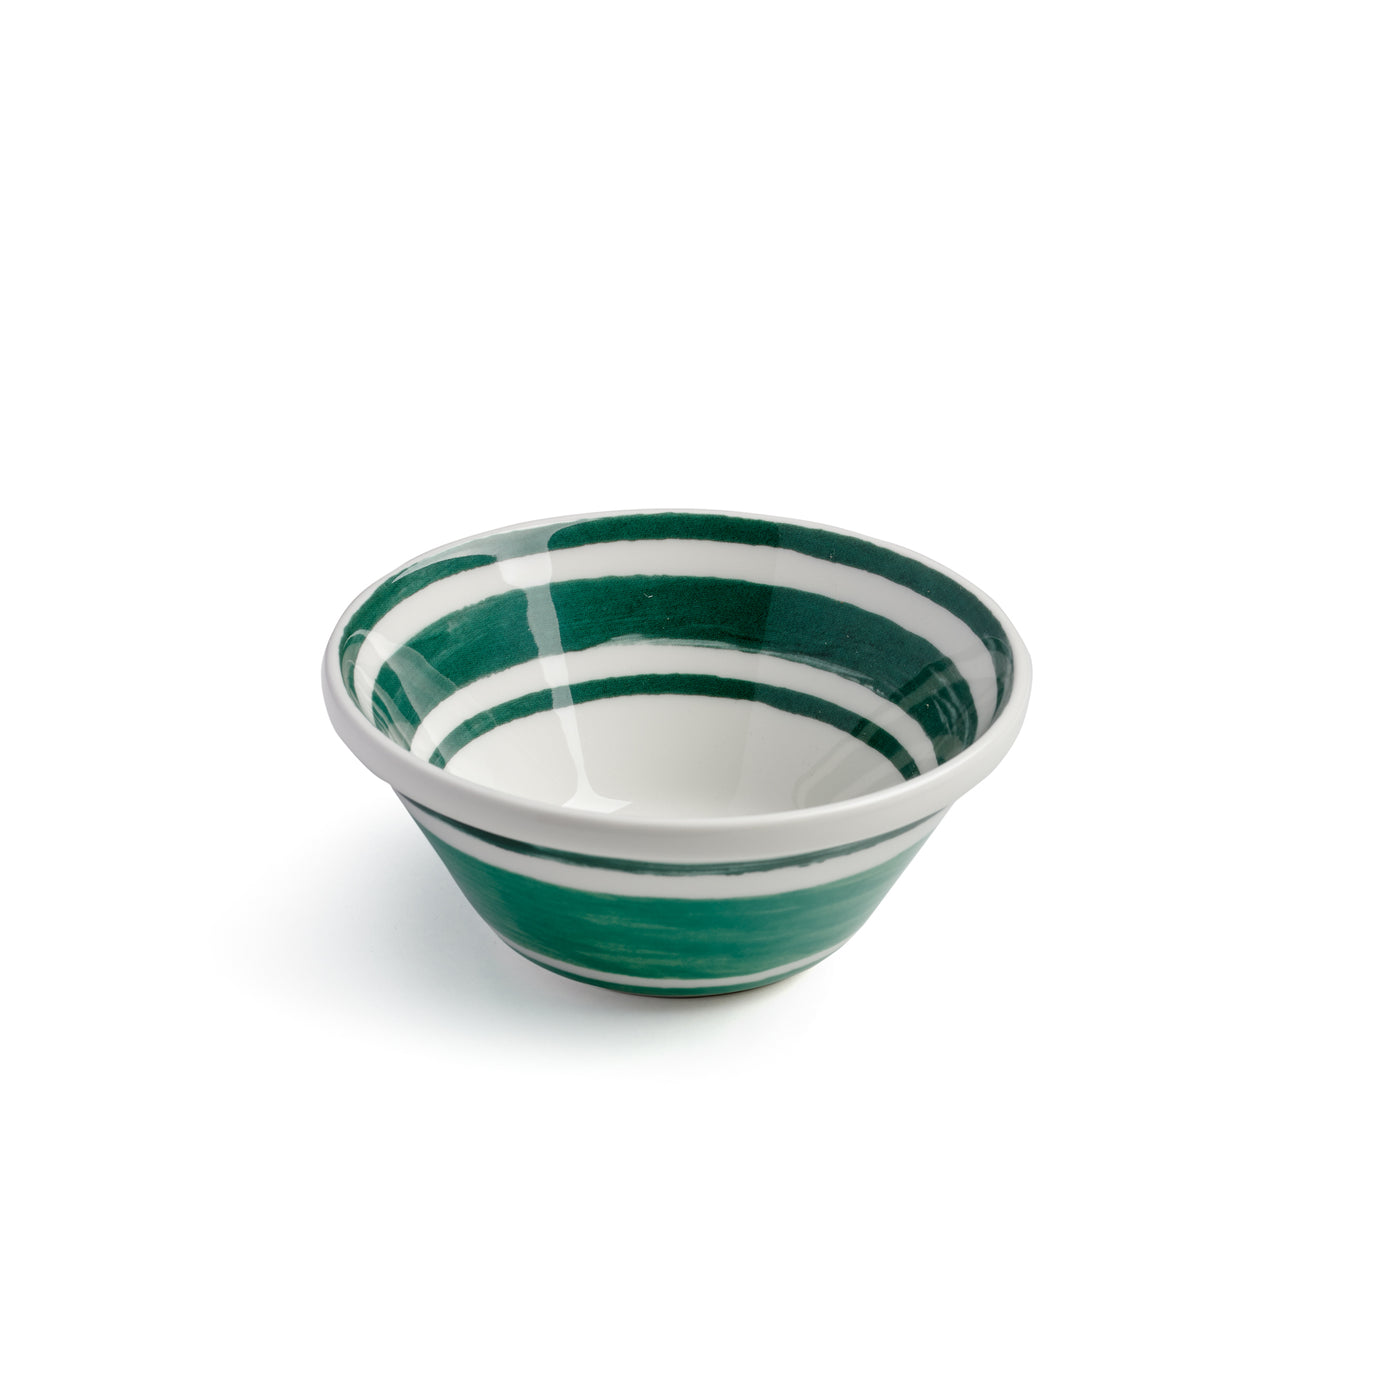 Maze Cereal Bowl in Green